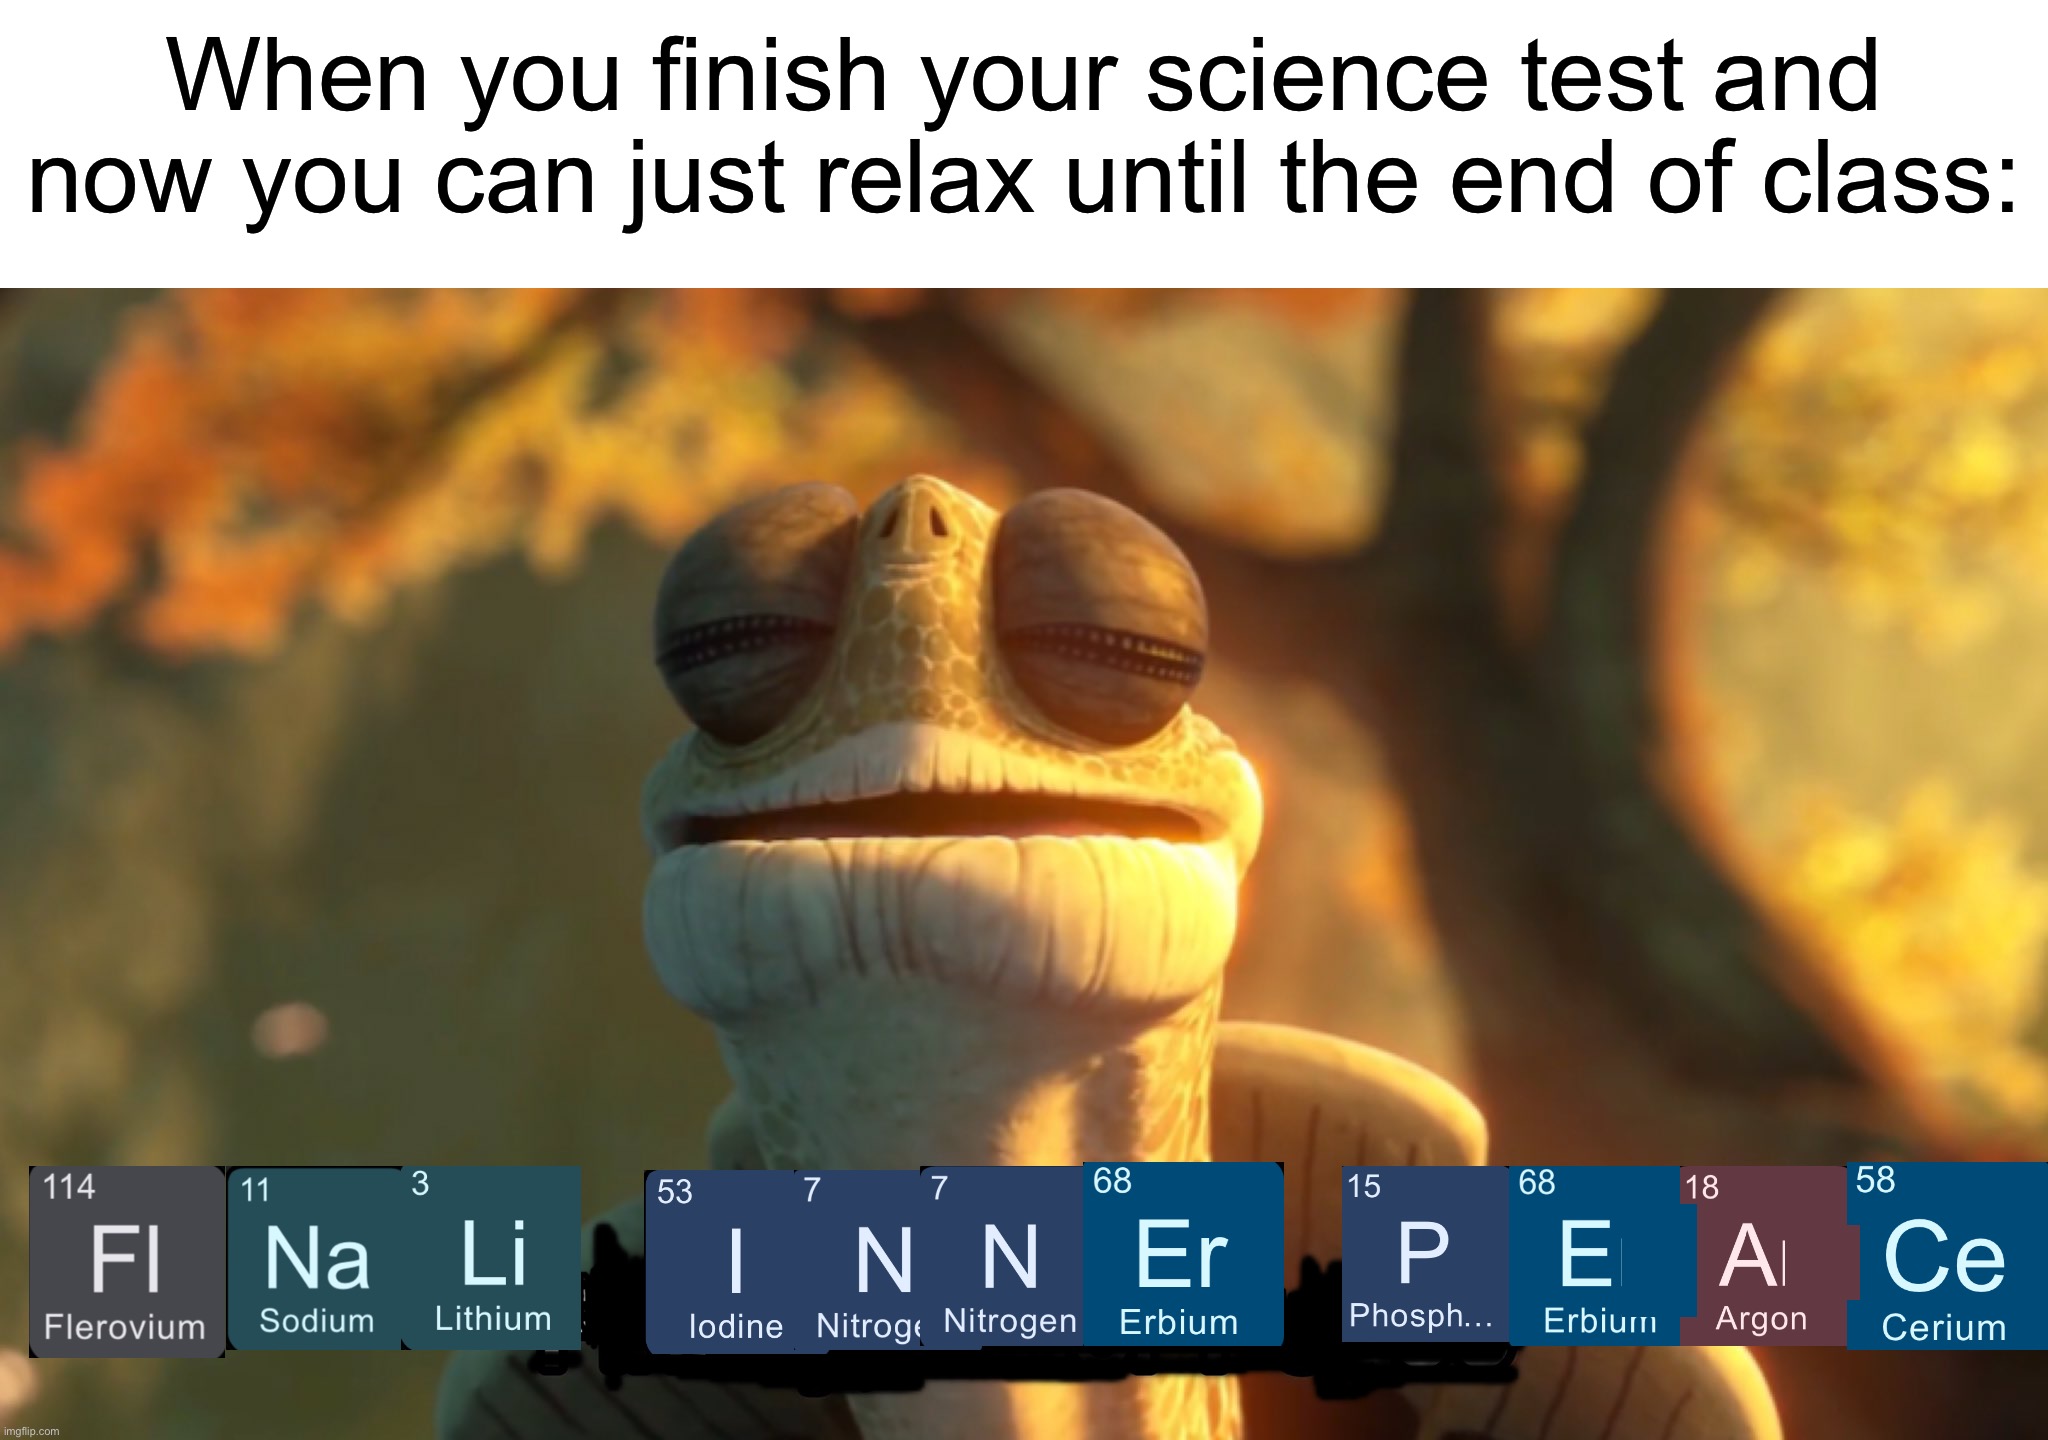 I can’t even begin to describe how much time it took to insert all these images lol | When you finish your science test and now you can just relax until the end of class: | image tagged in memes,funny,relatable memes,true story,school,funny memes | made w/ Imgflip meme maker